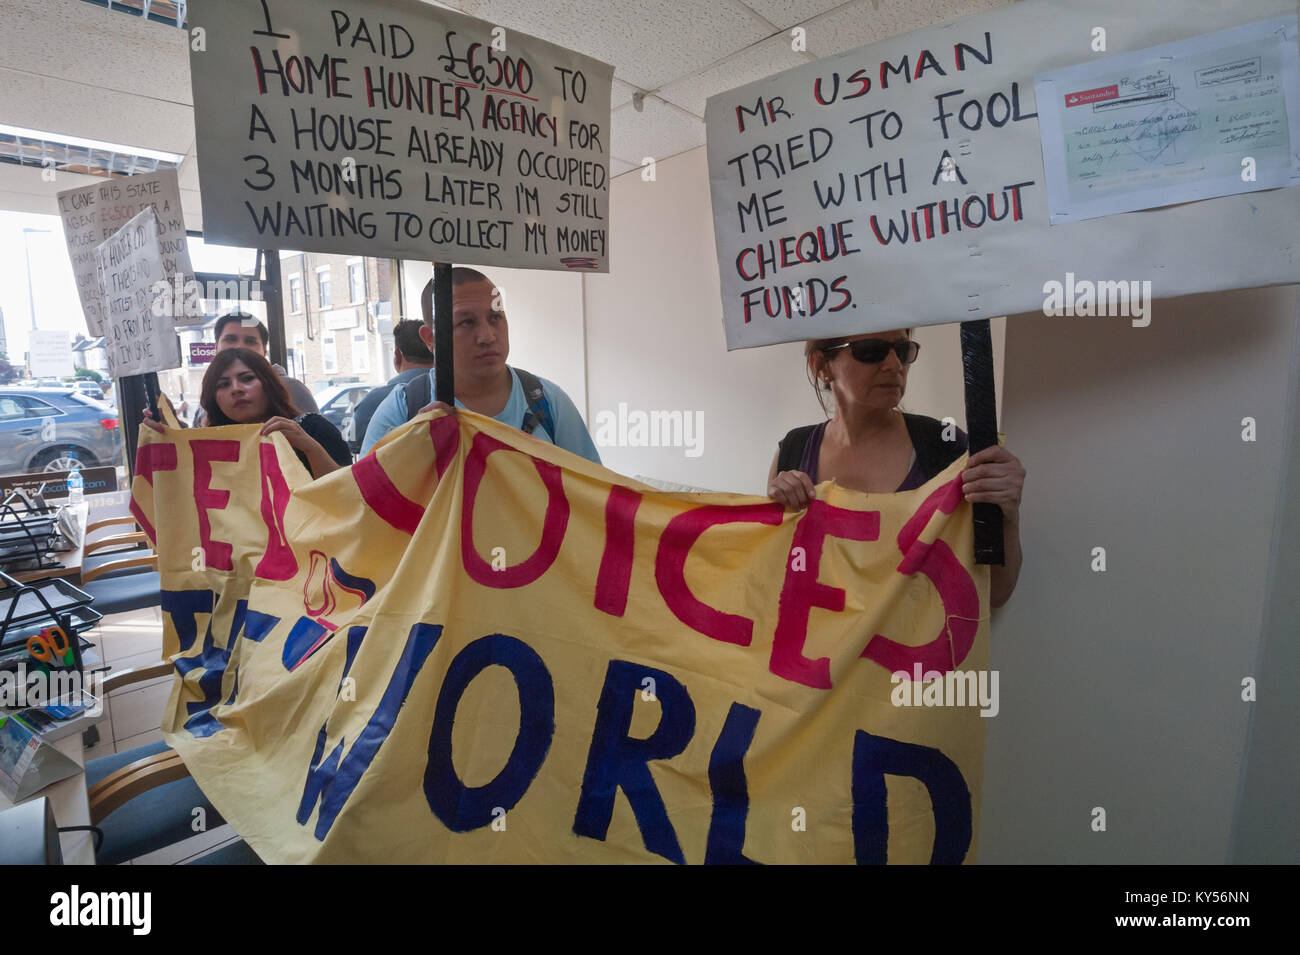 UVW members hold their banner and placards inside the office shared by Hunter Home Properties Ltd. Placards explain why they have come to demand the Usman Bhatti repays the remaining £5,500 he owes to Carlos. Stock Photo